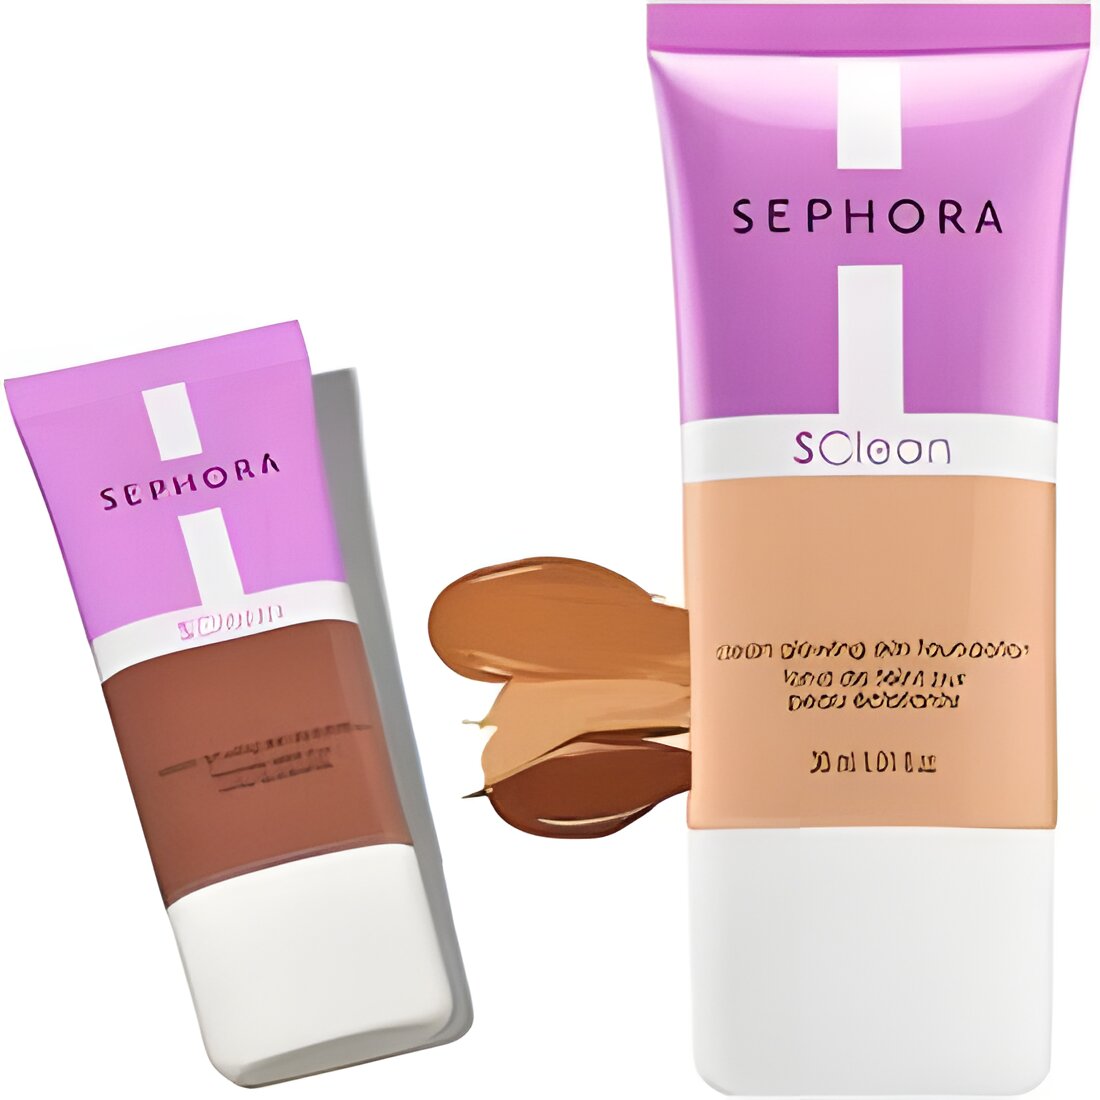 Free Sephora Collection Clean Glowing Skin Foundation Sample